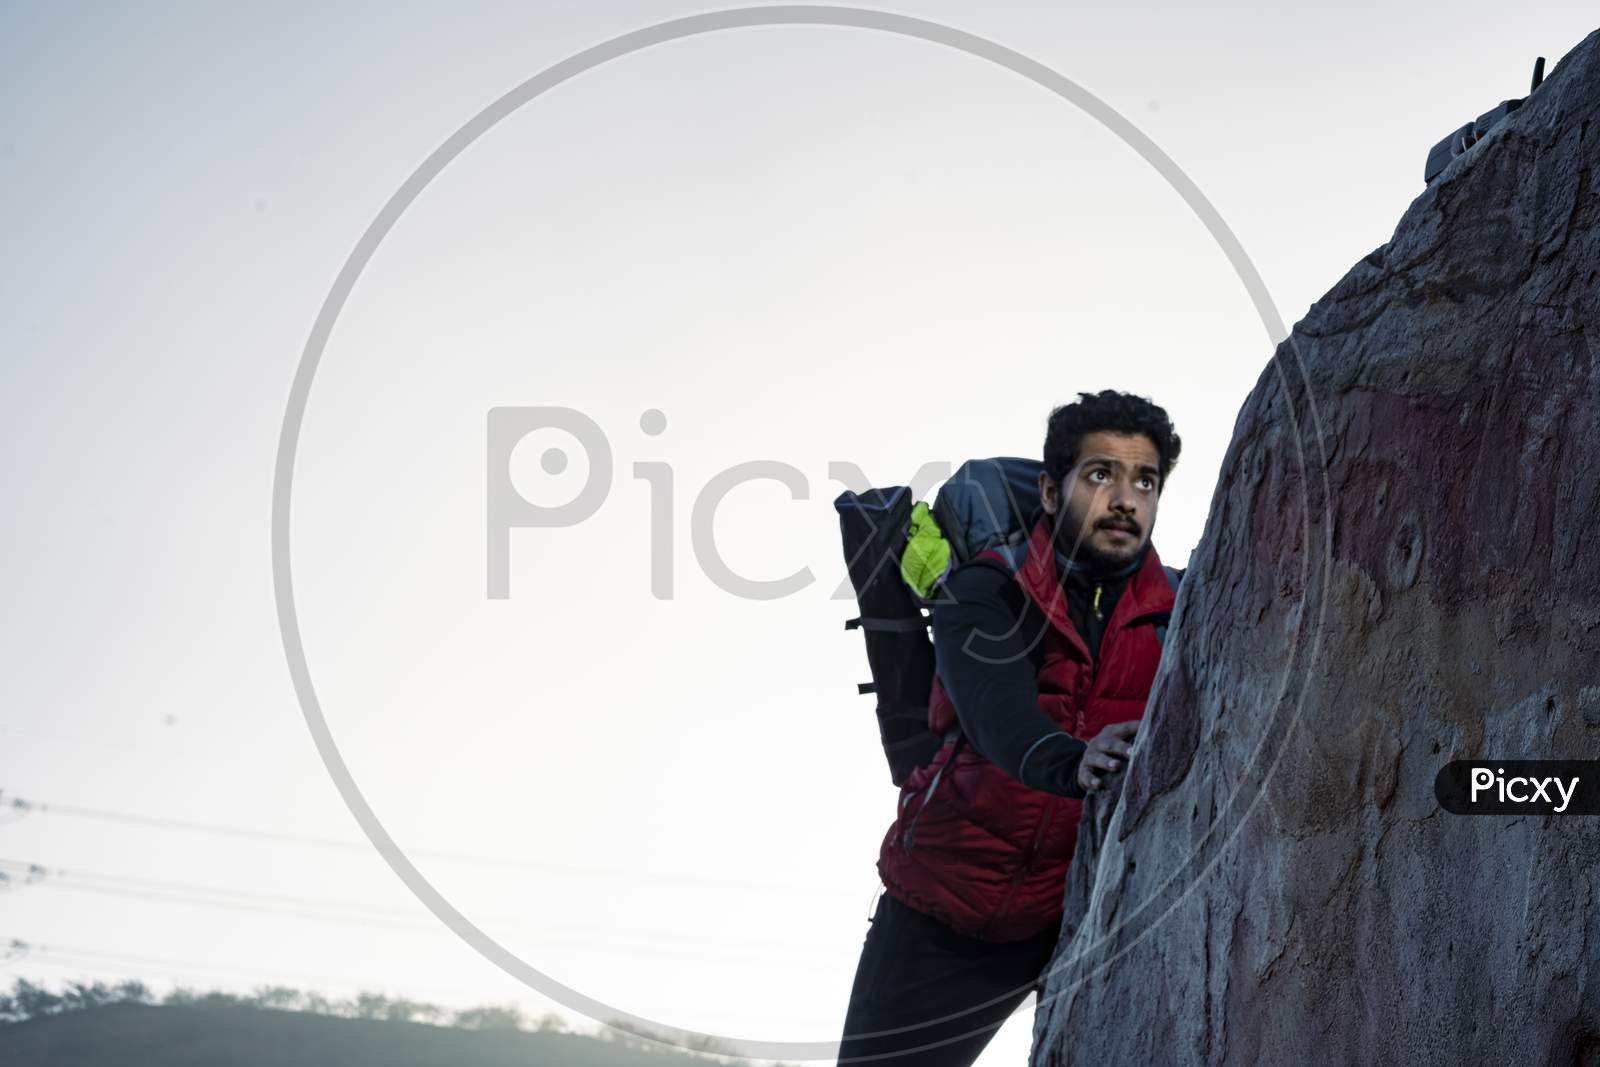 Young Indian Climber And Traveler Climbing Up The Mountain Rock During Sunset. Adventure And Sports Concept.